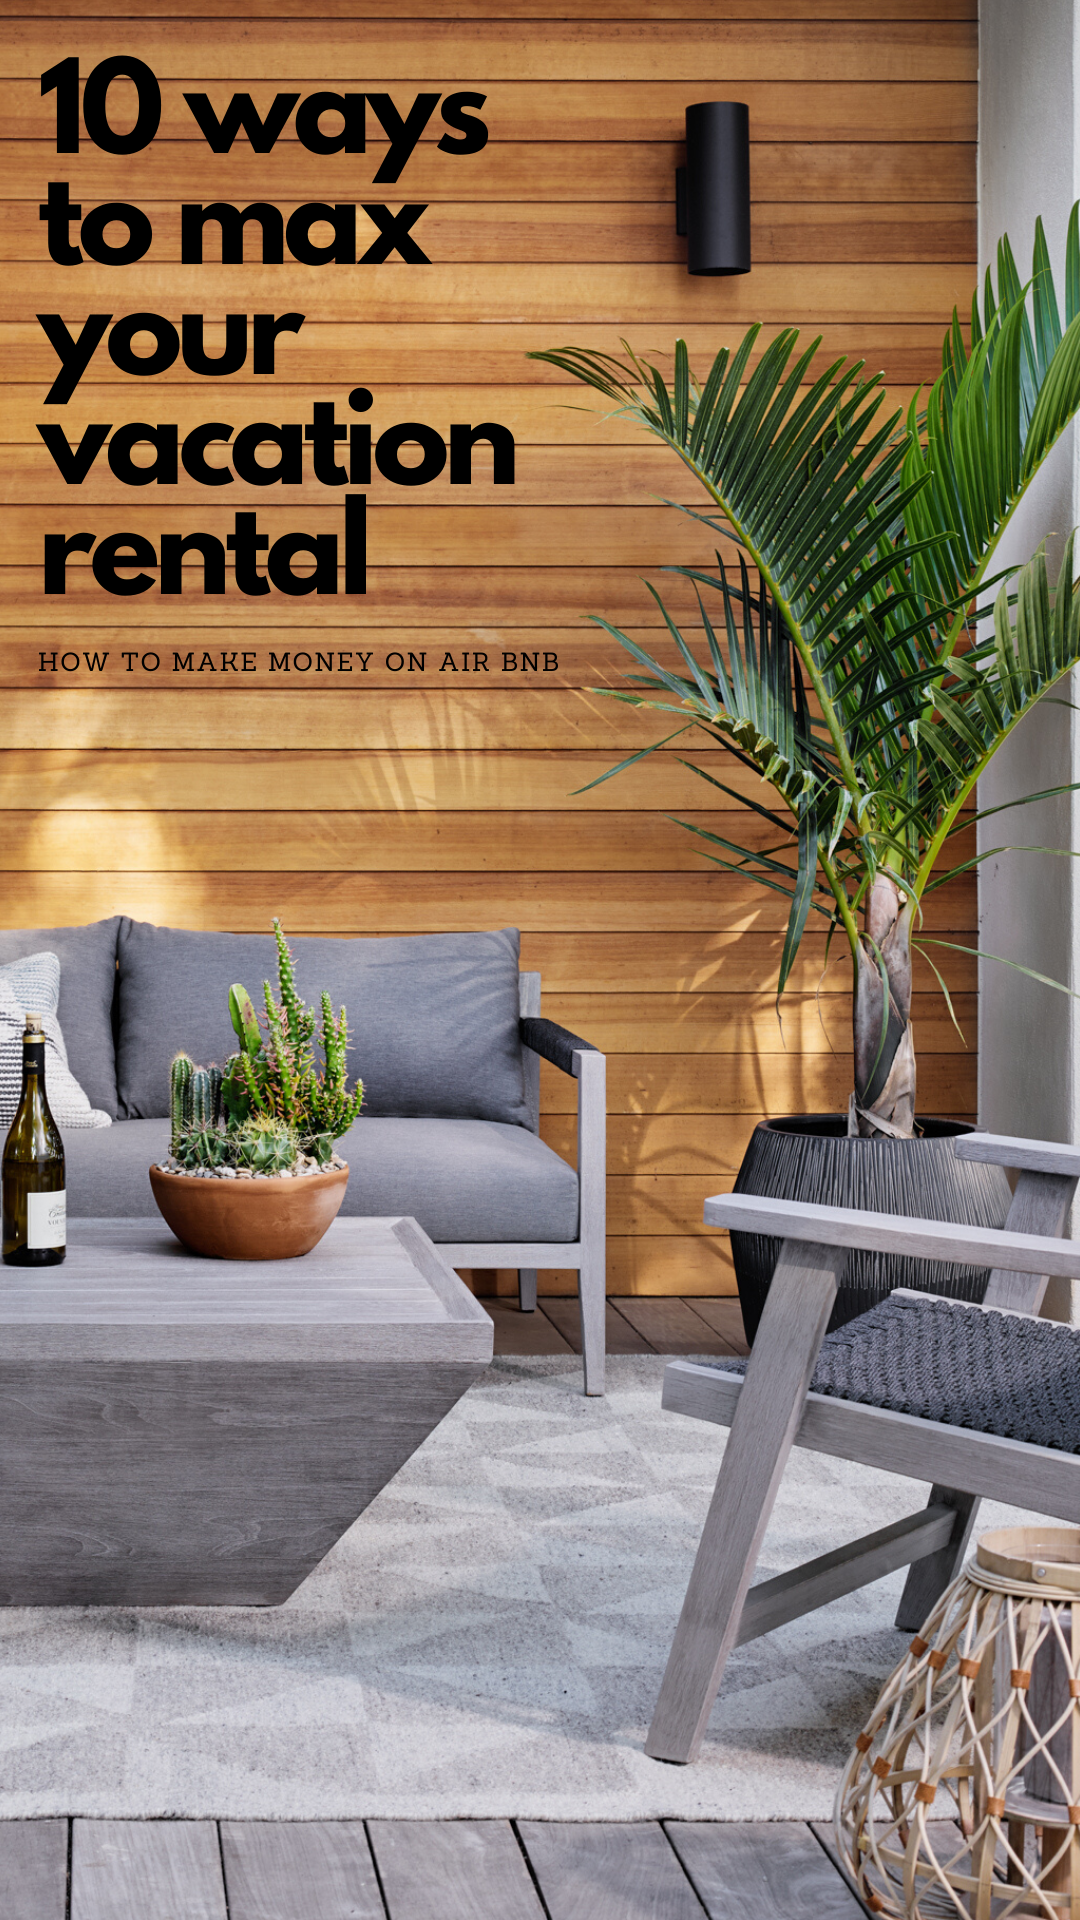 10 ways to max your vacation rental